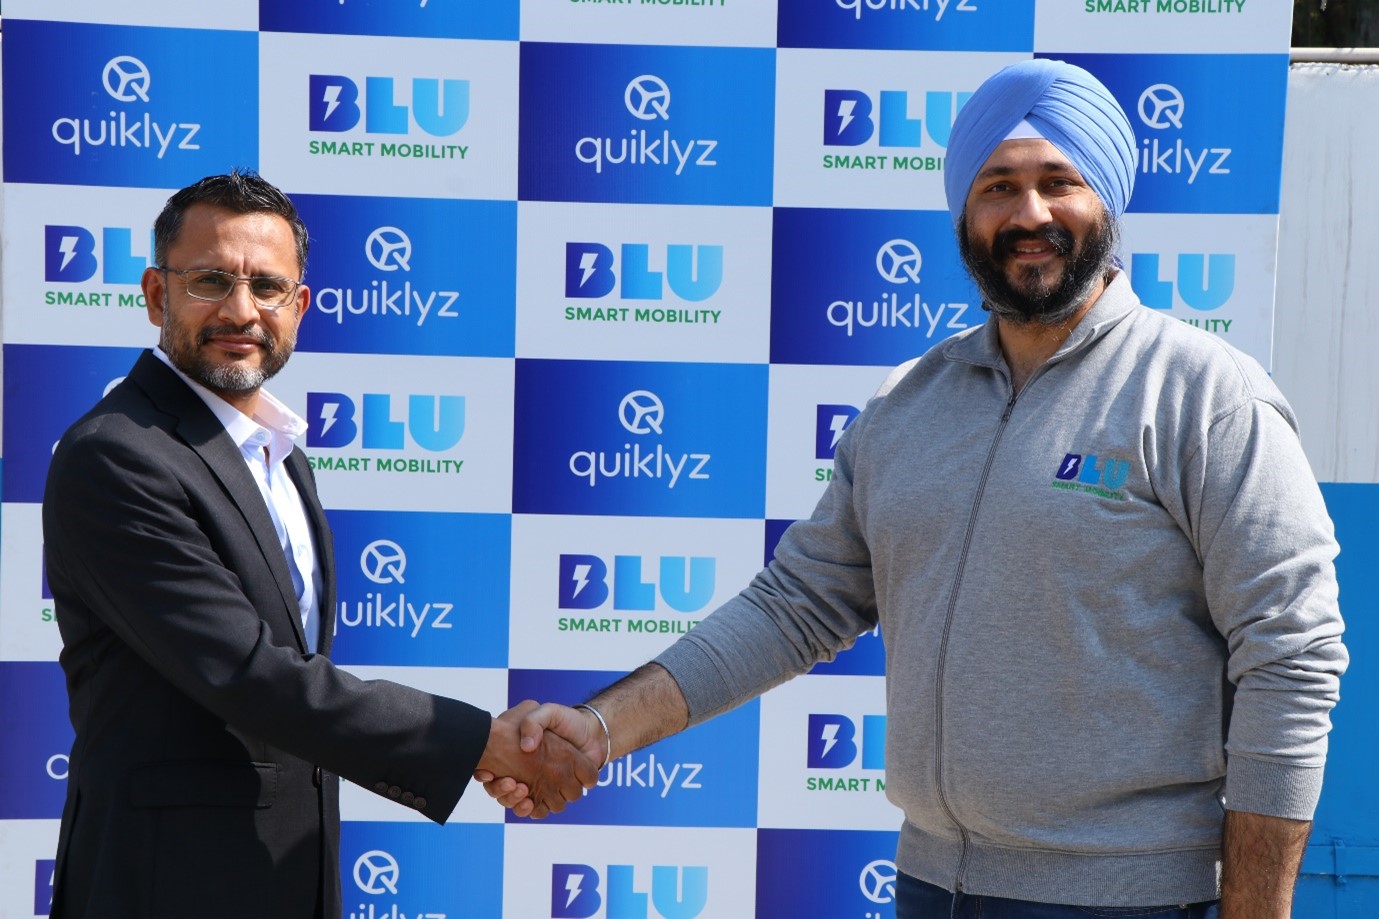 Quiklyz ties up with BluSmart to provide 500 EVs on leasing